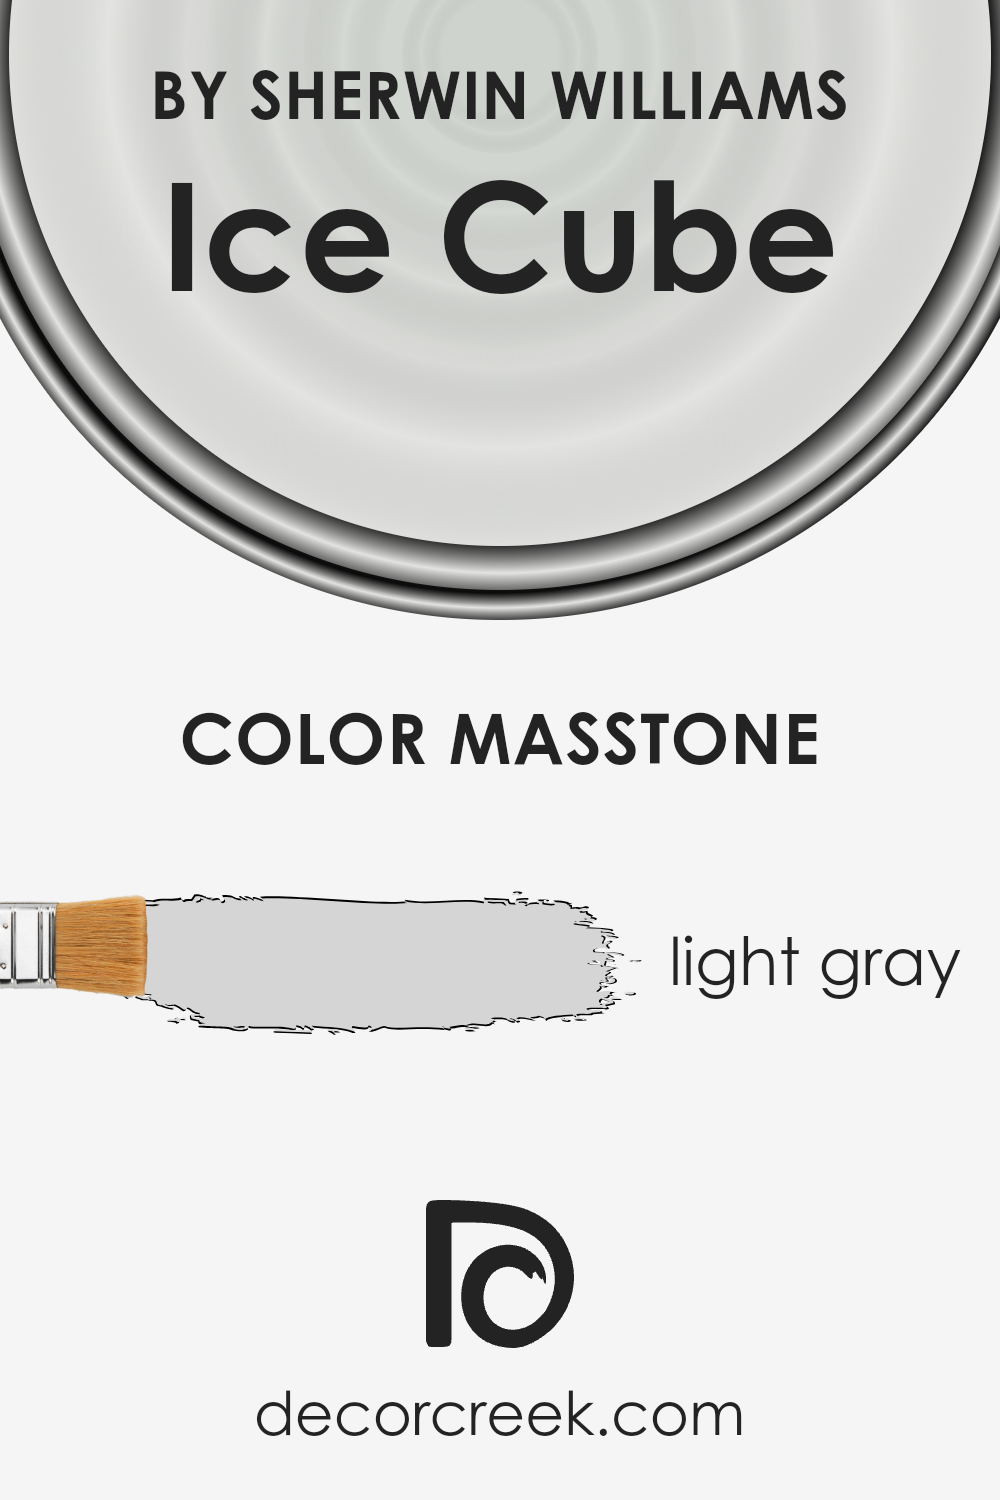 what_is_the_masstone_of_ice_cube_sw_6252